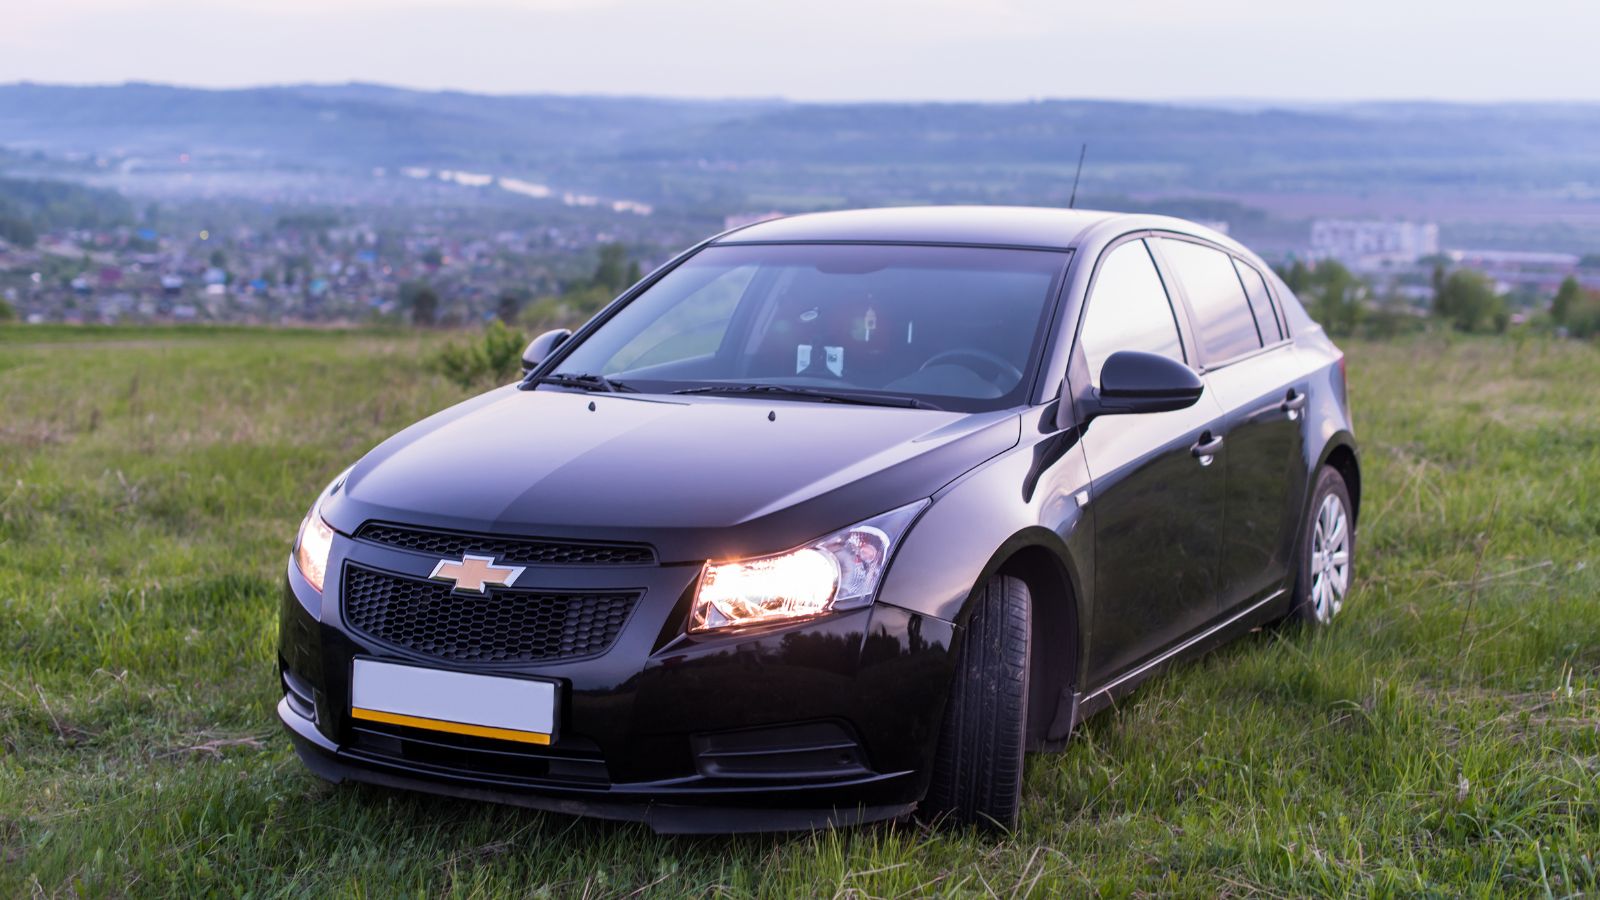 <p>Once a popular compact car option, the Cruze’s reputation was tarnished by models manufactured from 2011 to 2015. Problems with the engines, transmissions, and in-car electrics forced Chevrolet to issue a number of recalls, leaving second-hand owners facing hefty repair fees to get their vehicles working again. Go for a model from 2016 or later instead.</p>